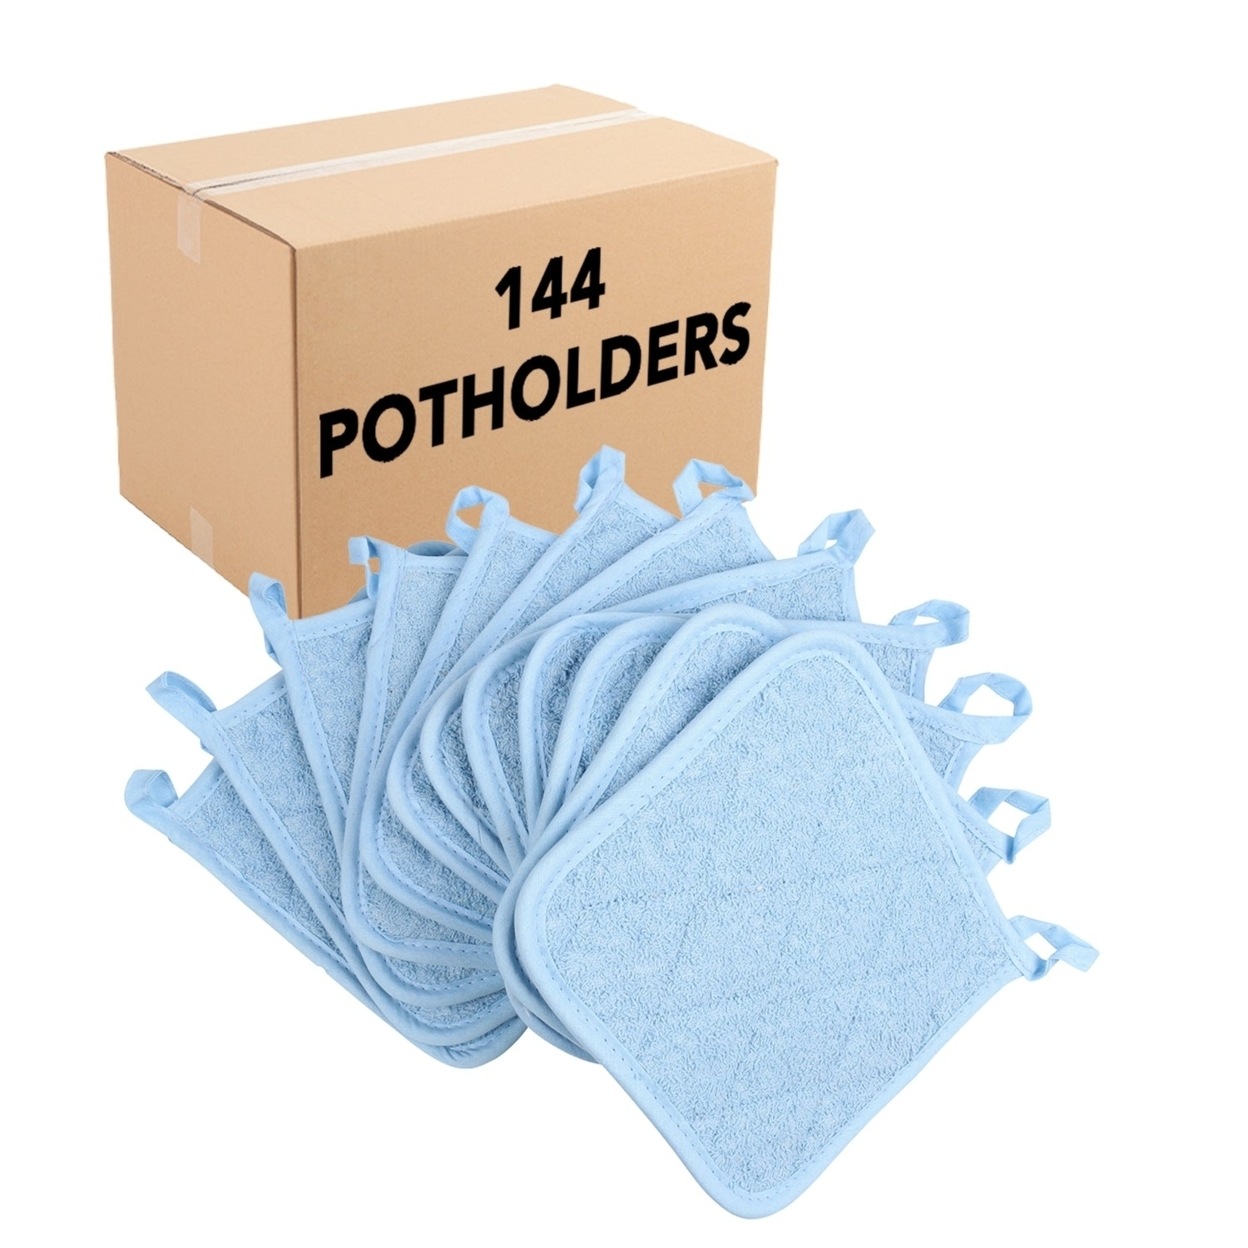 Pot Holder 12-Pack, Cotton Terry, Looped, 7x7 in., Six Colors, Buy a 12-Pack or a Case of 144. - Blue, Case of 144